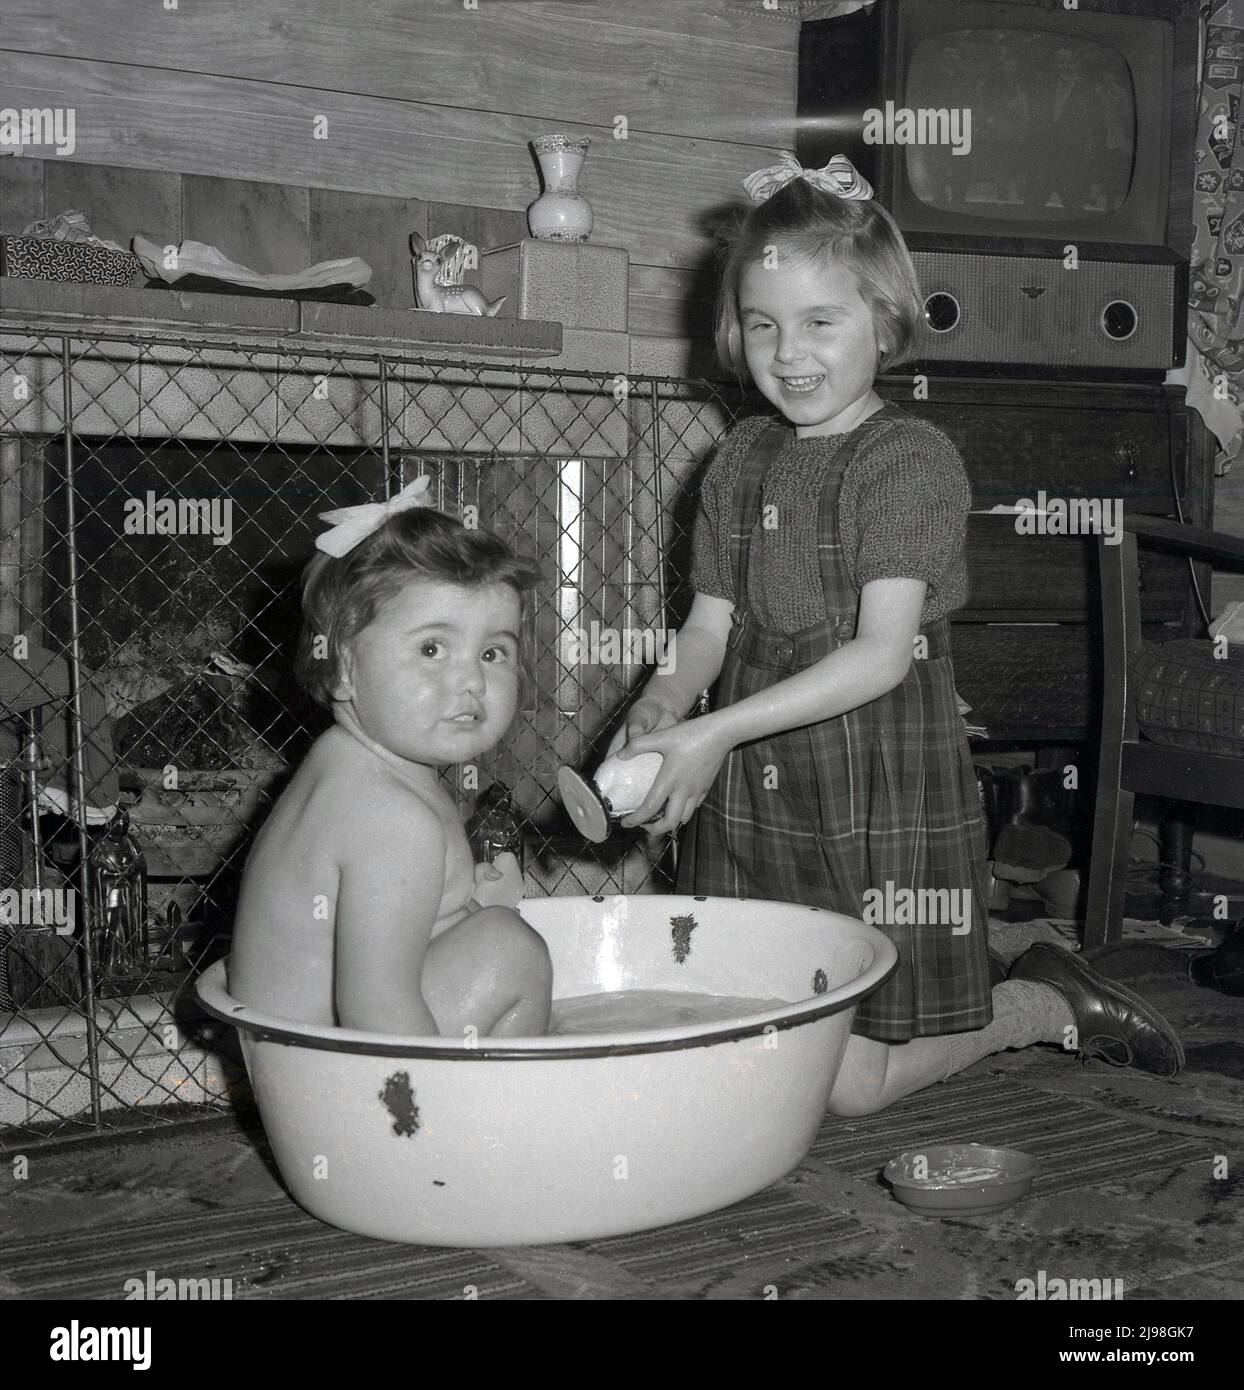 1961, historicsl, litting sitting in an enamal basin or bowl in front of the fire having a bath, with her big sister  beside her a toy penguin, Stockport, England, UK. A television set of era is in the corner of the room. Stock Photo